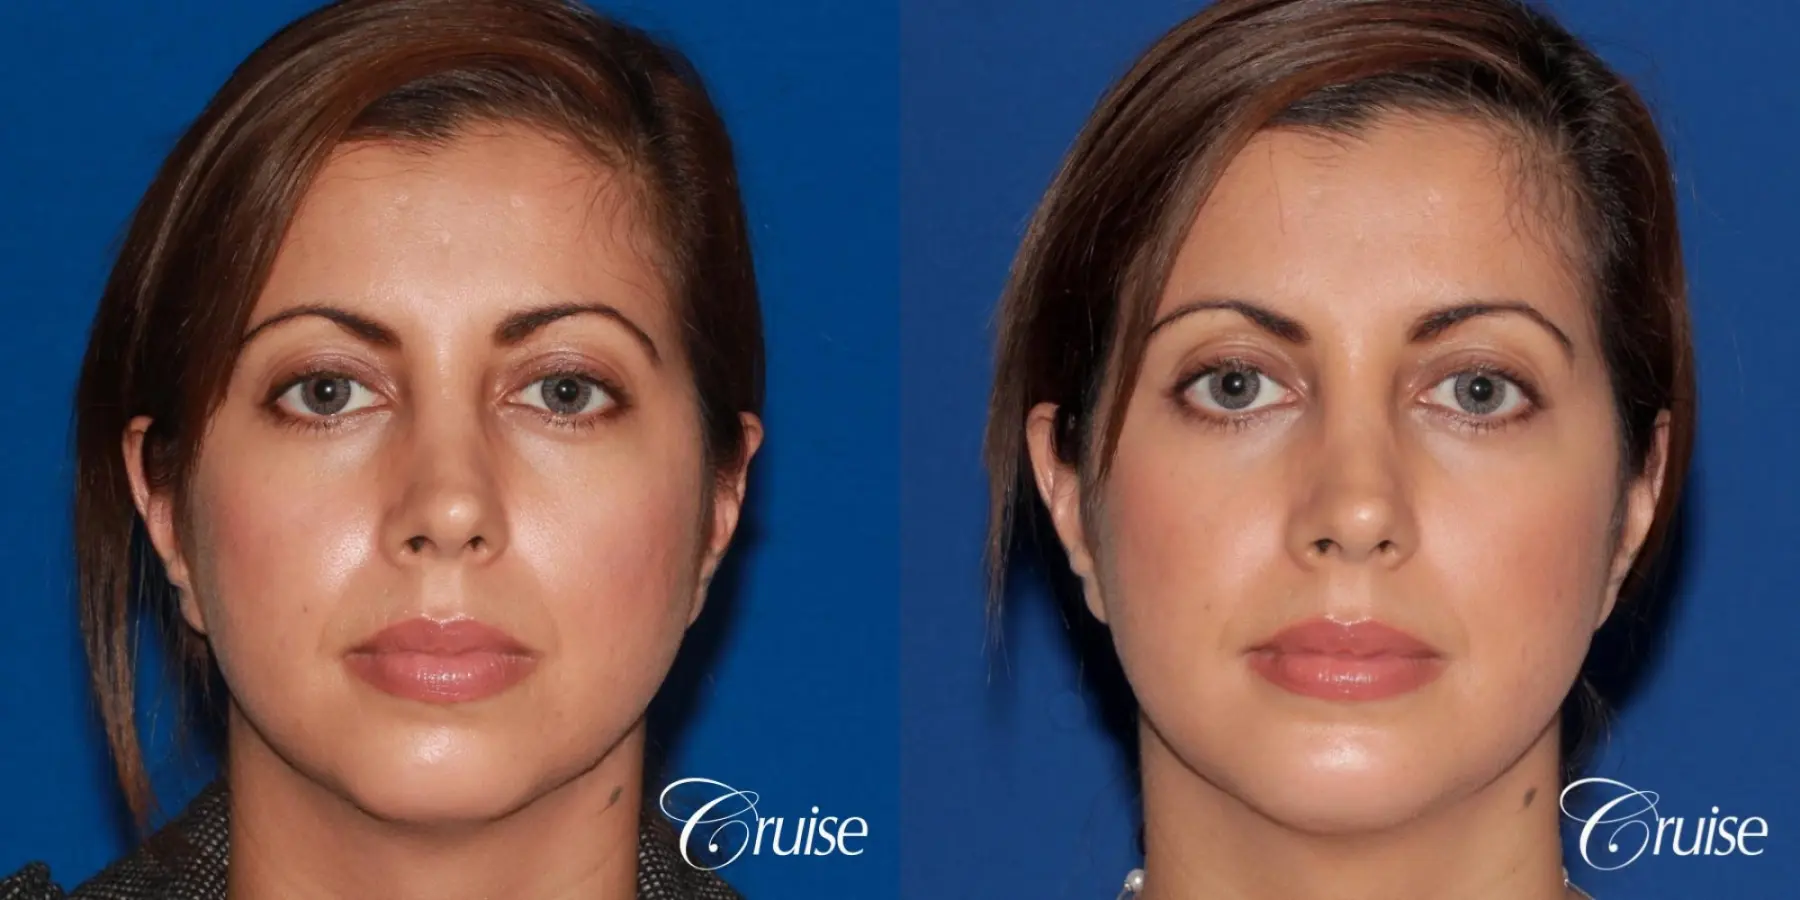 woman with large anatomic chin implant - Before and After 1